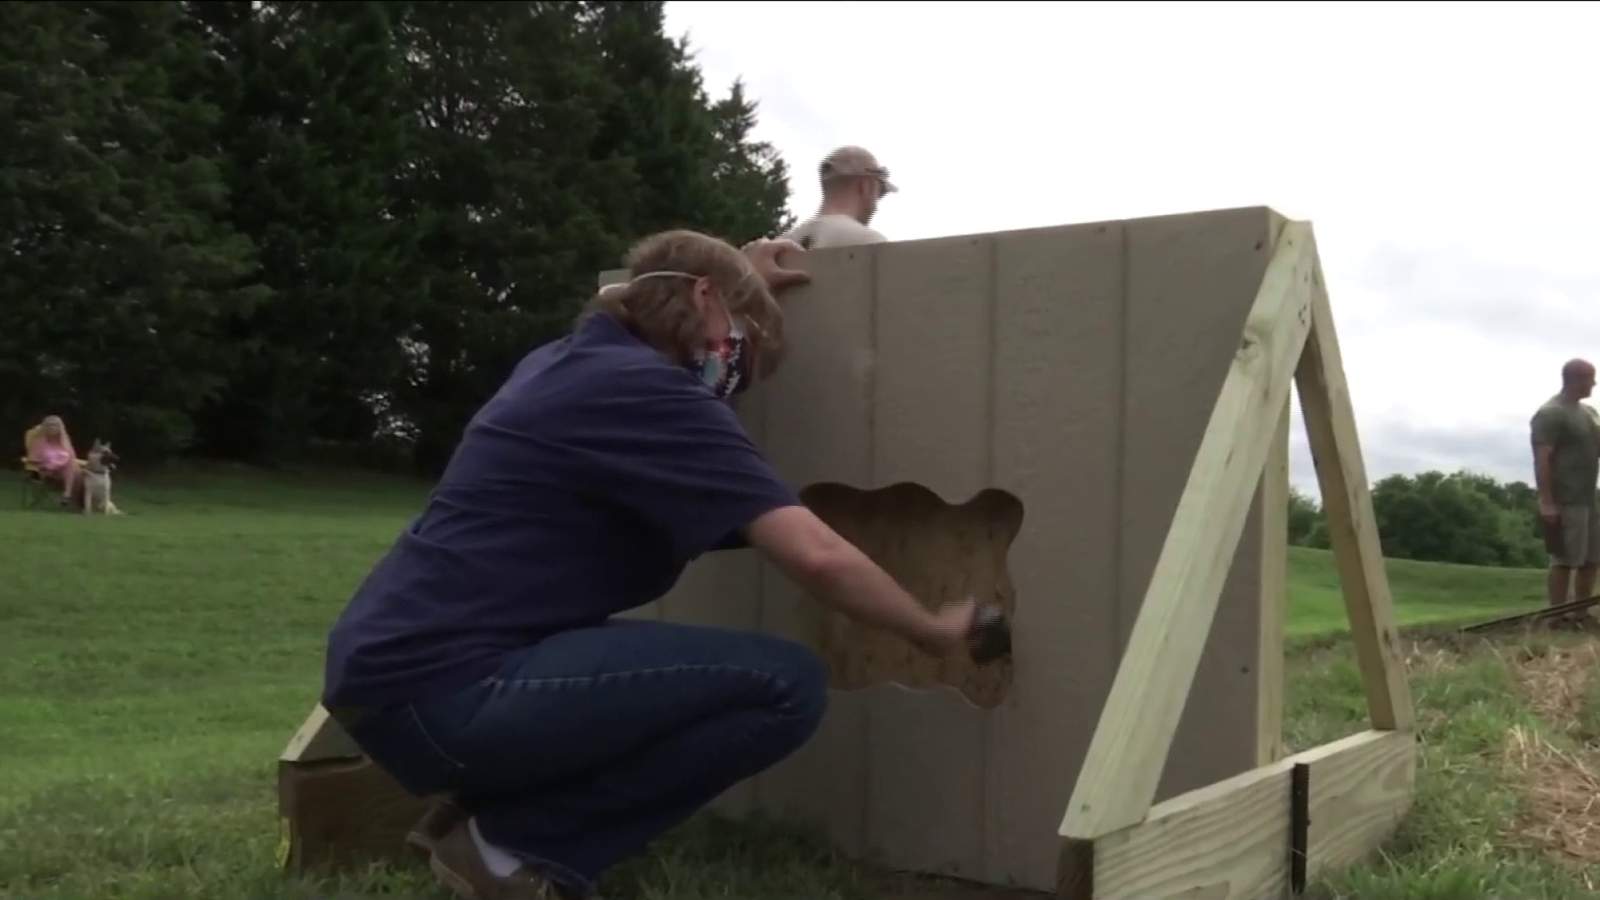 Room to run: Roanoke County K9 officers receive their own obstacle course